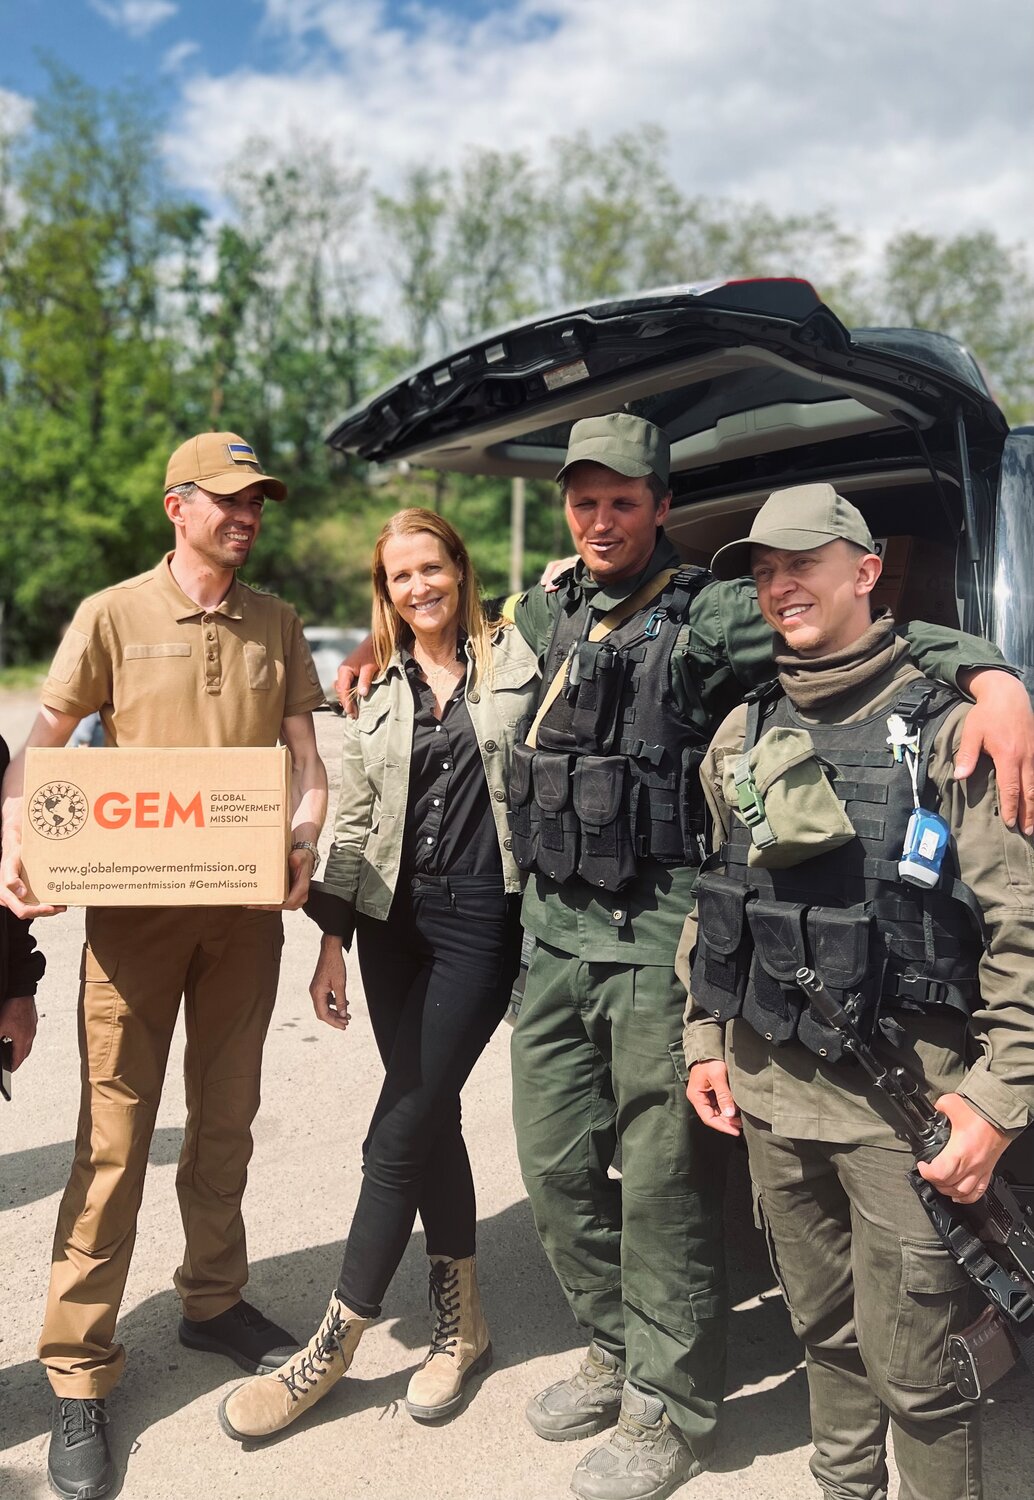 India Hicks, second from left, during a humanitarian aid trip to Ukraine with Global Empowerment Mission (GEM).